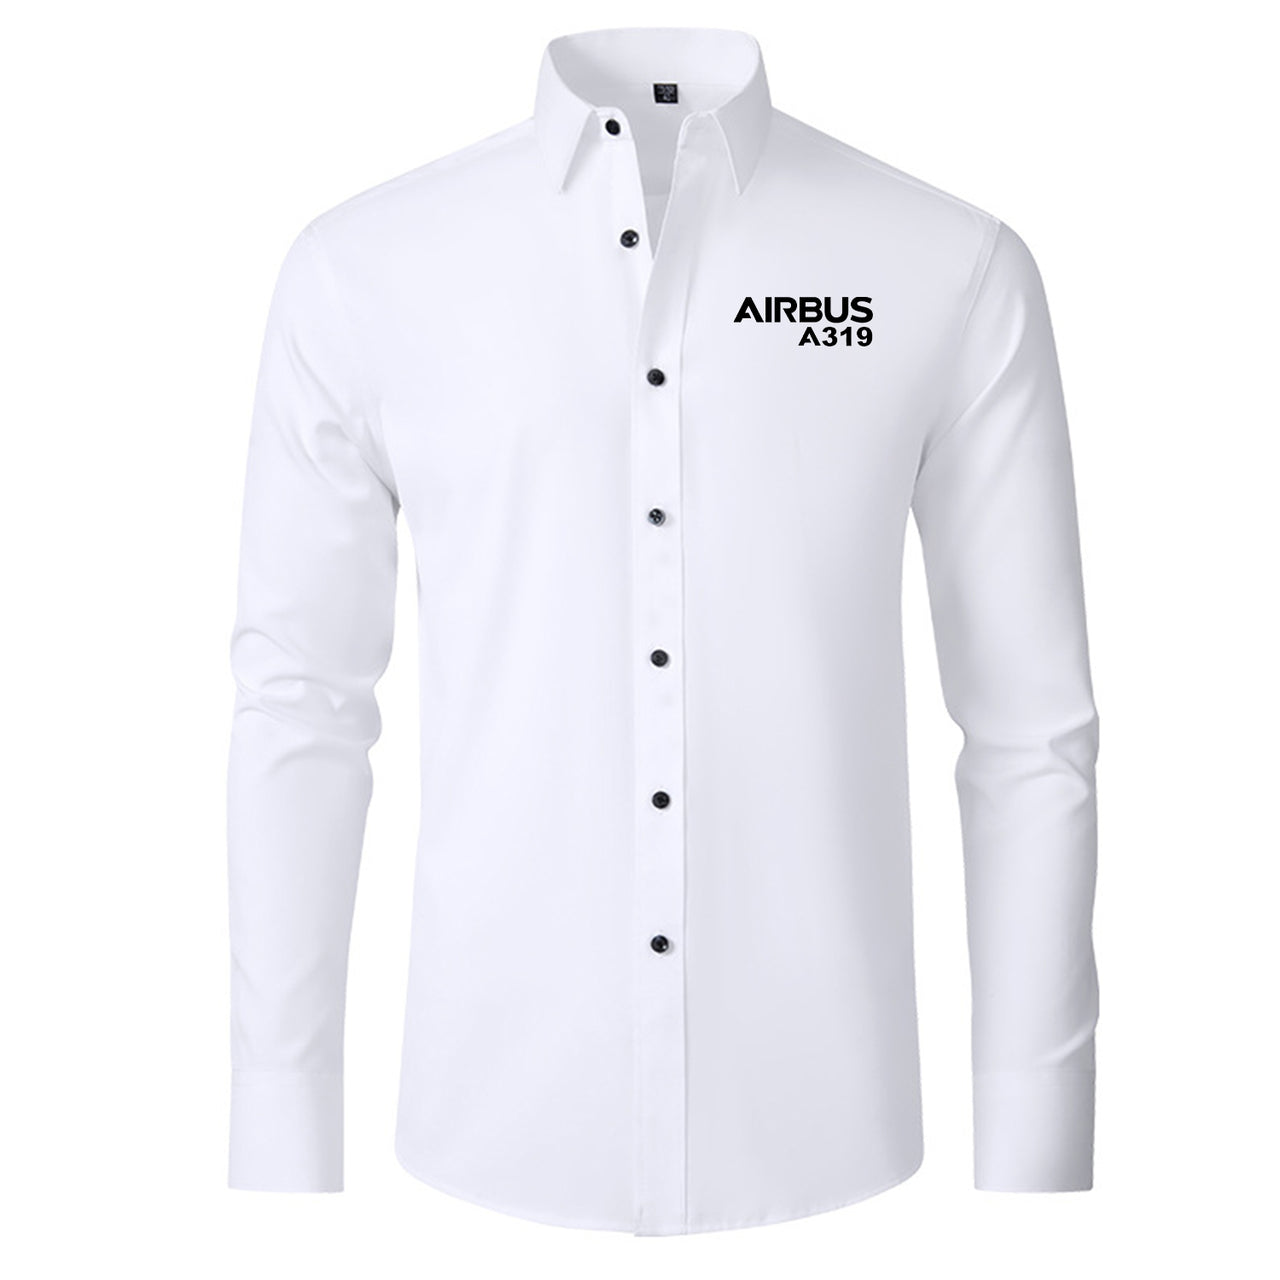 Airbus A319 & Text Designed Long Sleeve Shirts